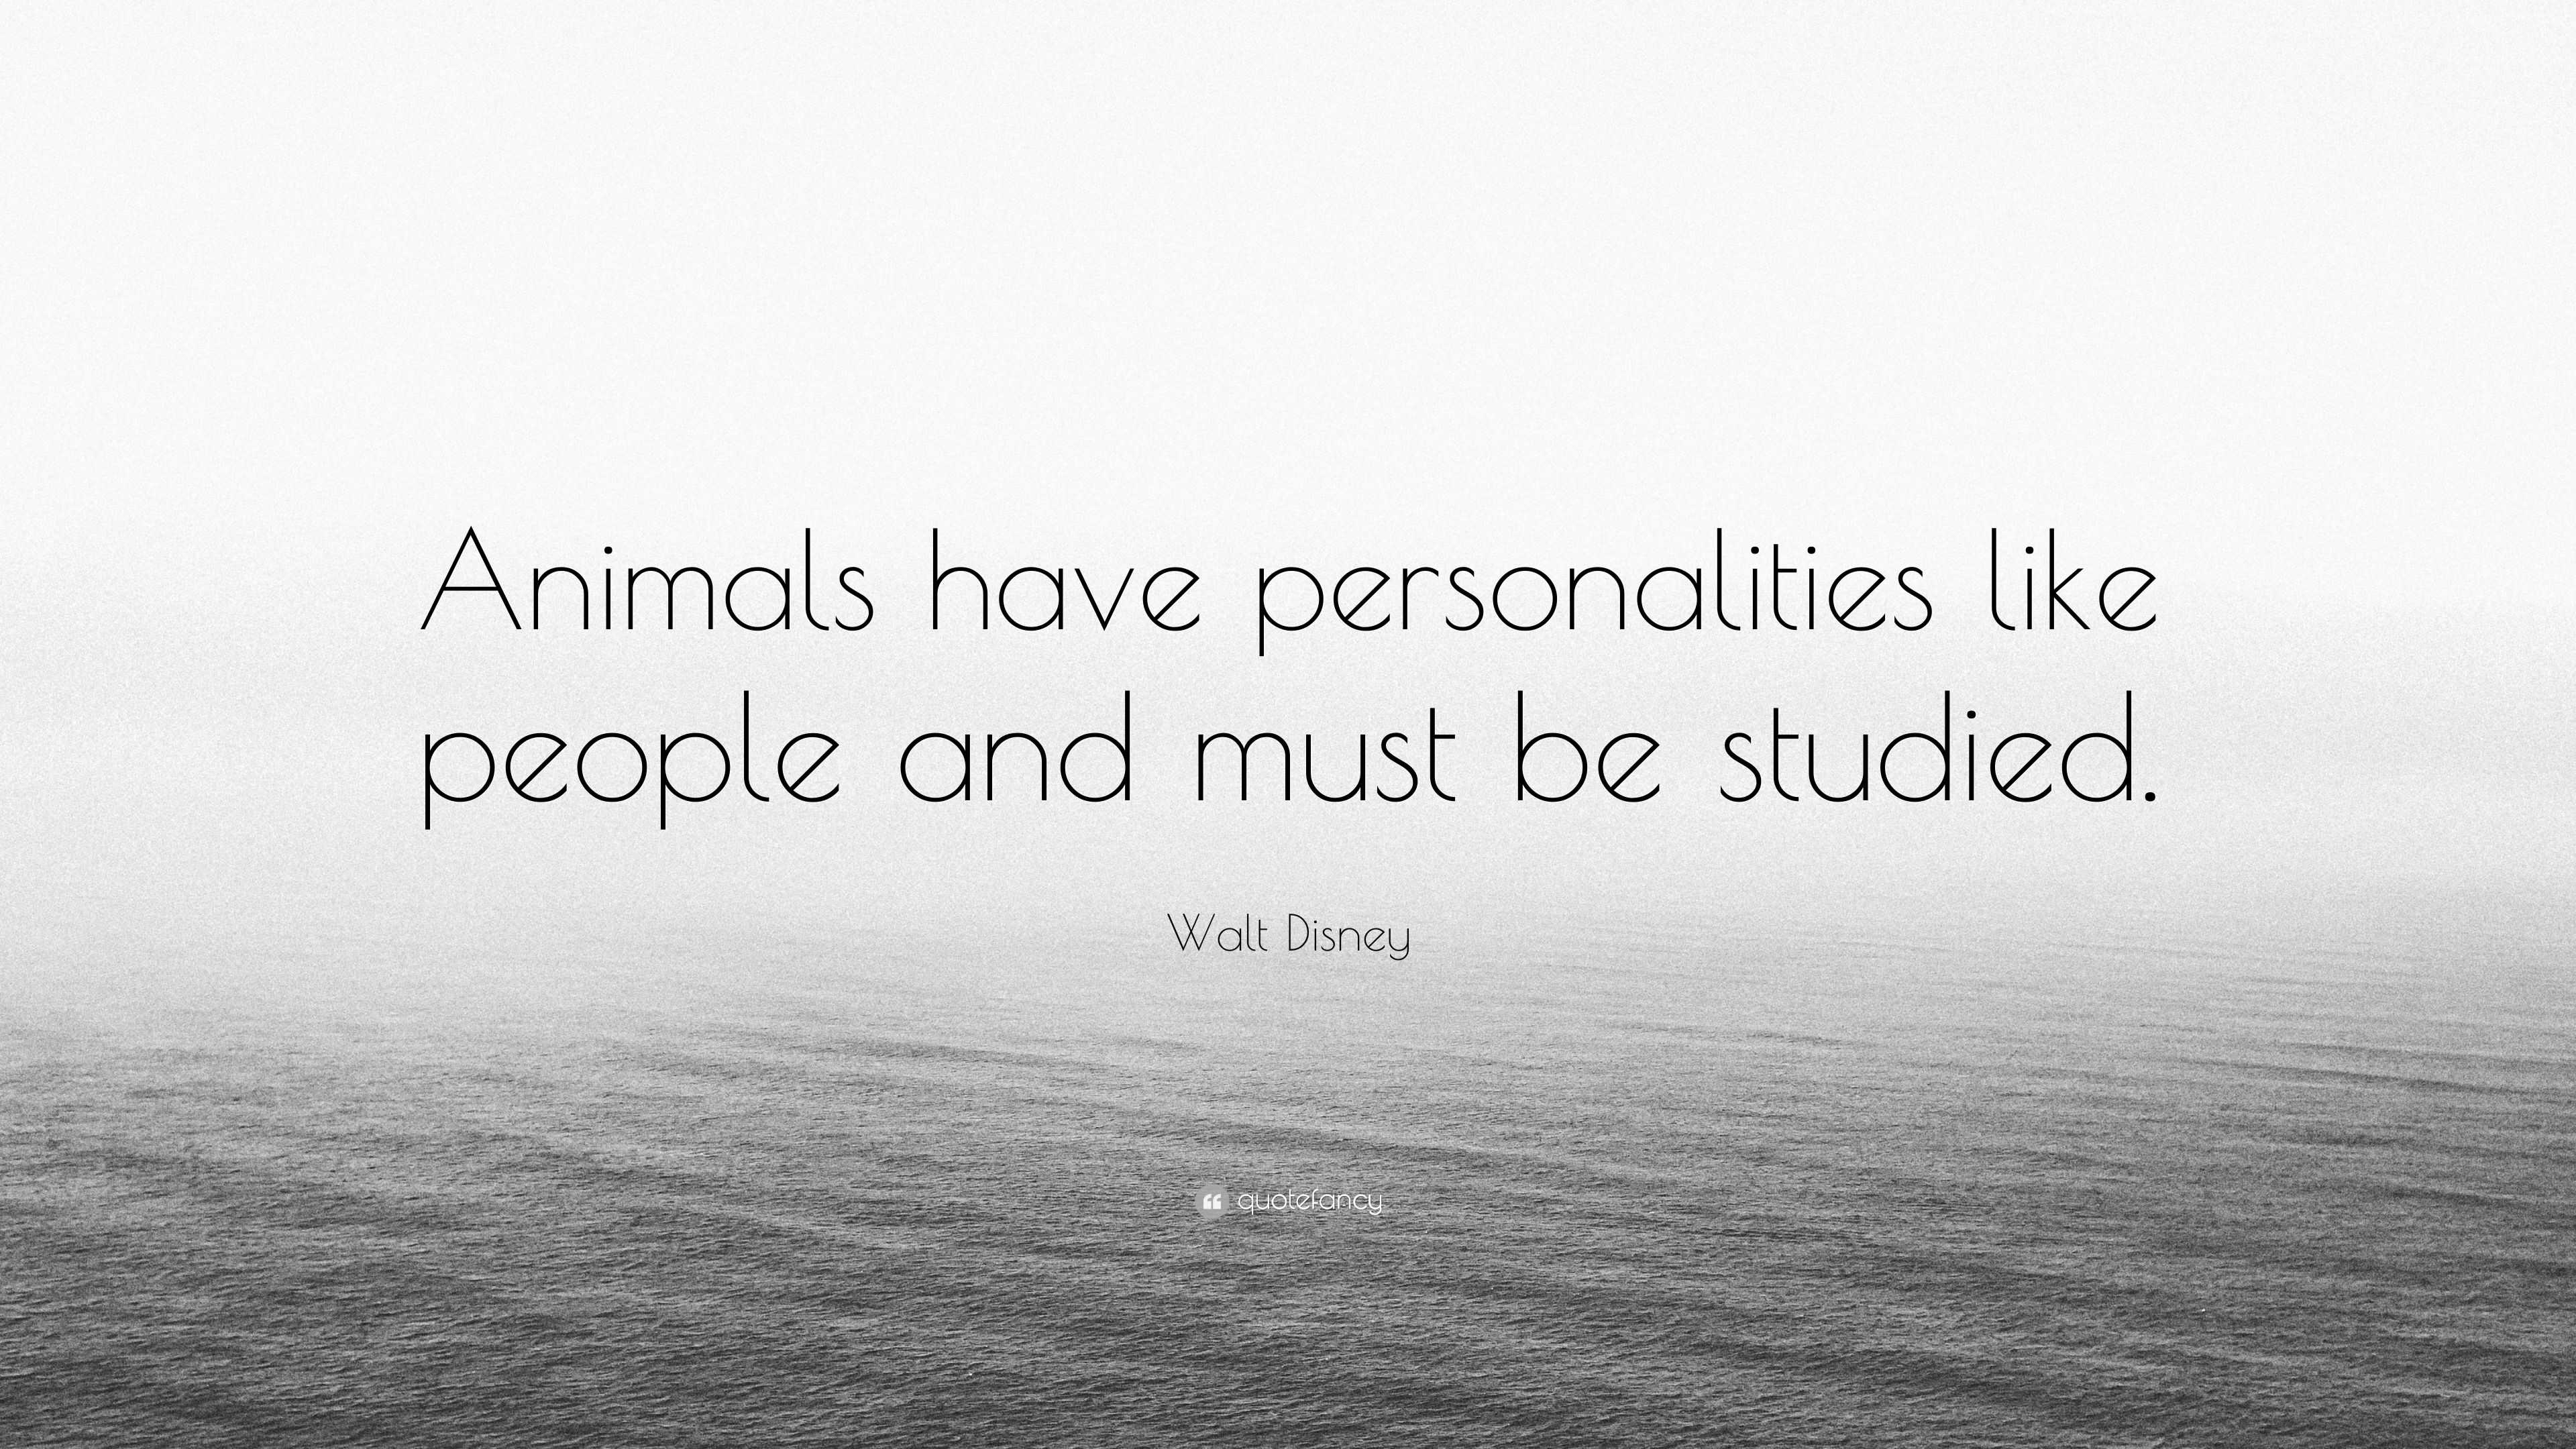 Walt Disney Quote: “Animals have personalities like people and must be  studied.”